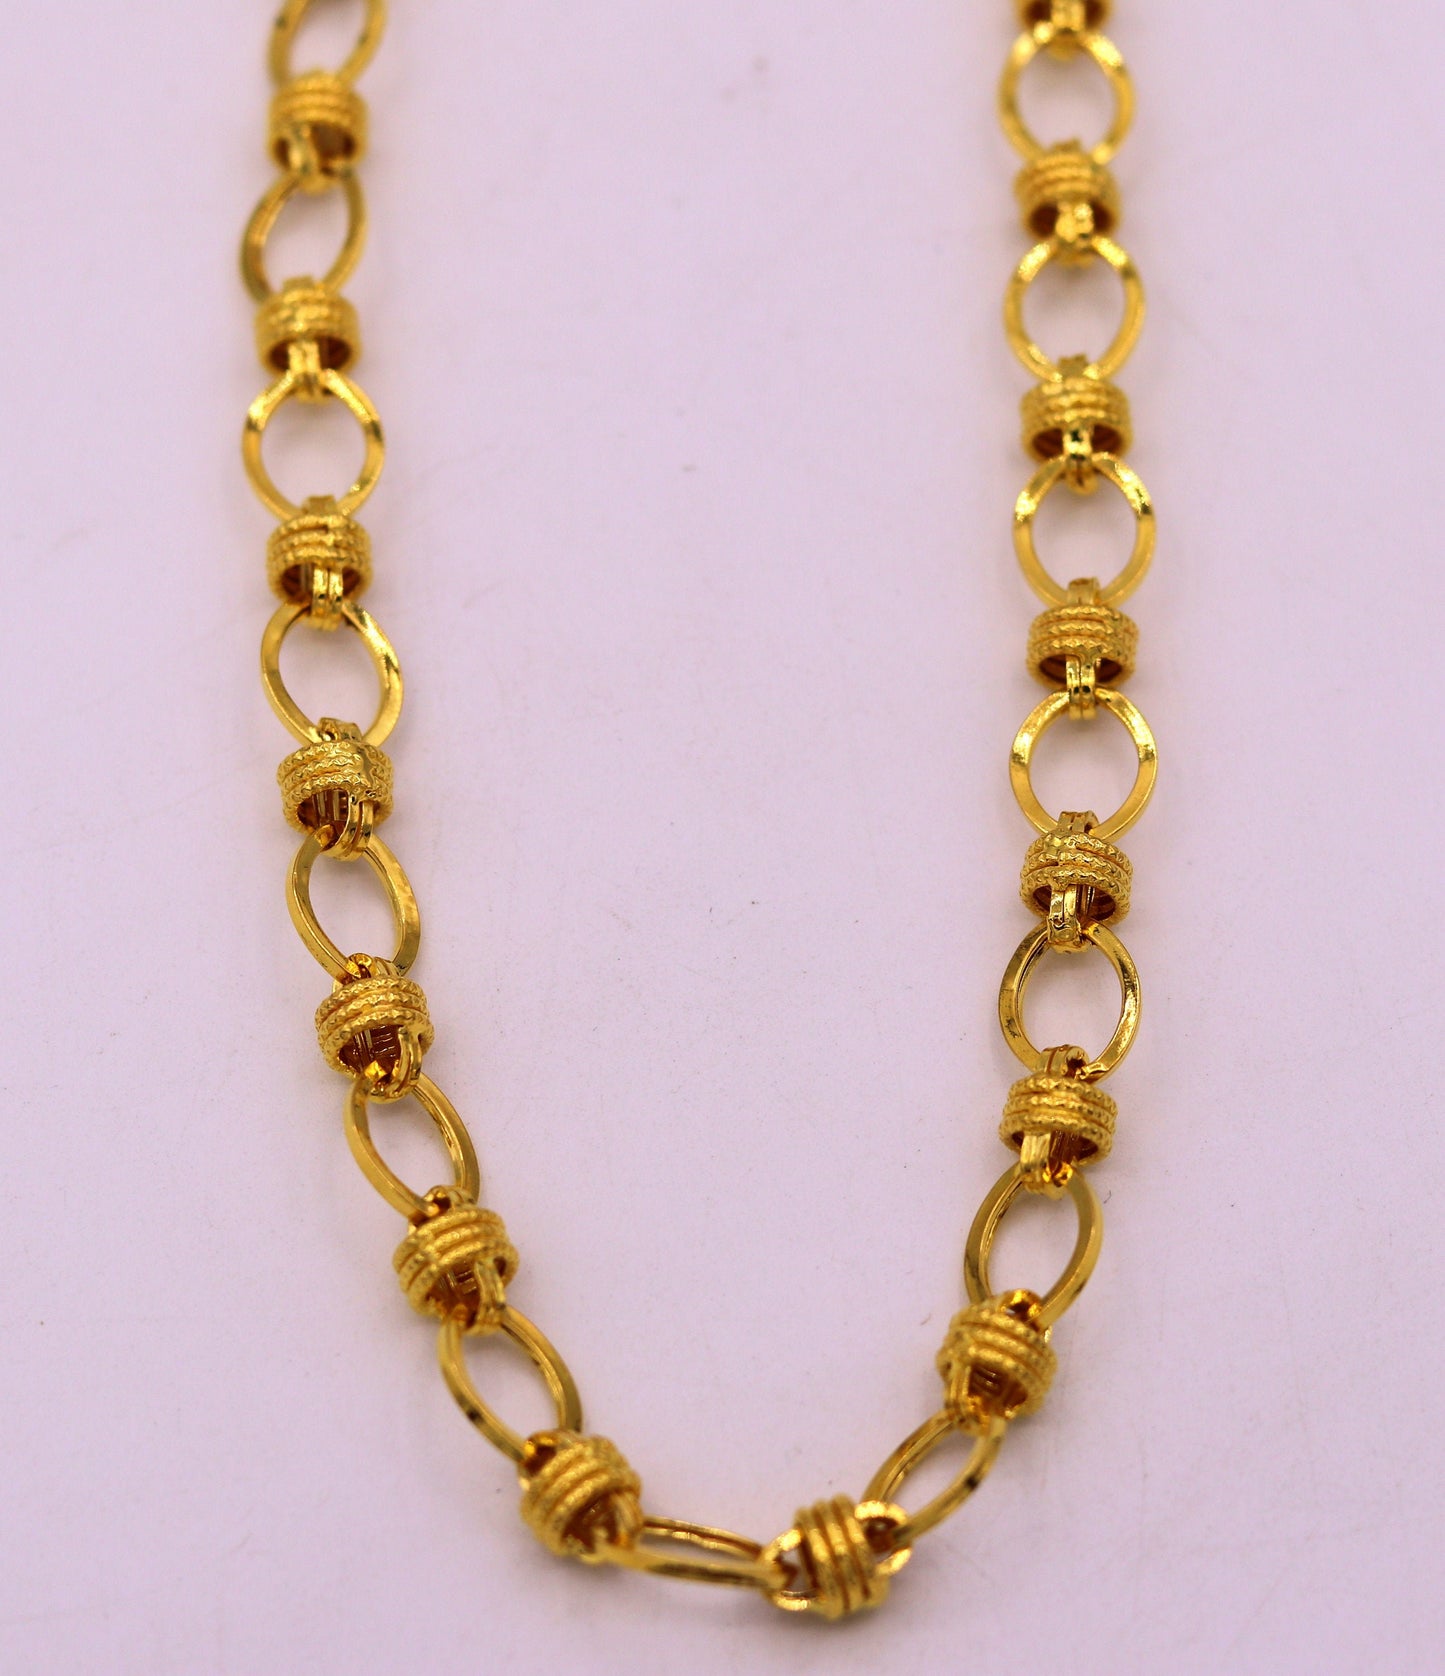 Vintage design handmade 22kt yellow gold amazing stylish 20 inches long chain necklace link chain from rajasthan india ch213 - TRIBAL ORNAMENTS